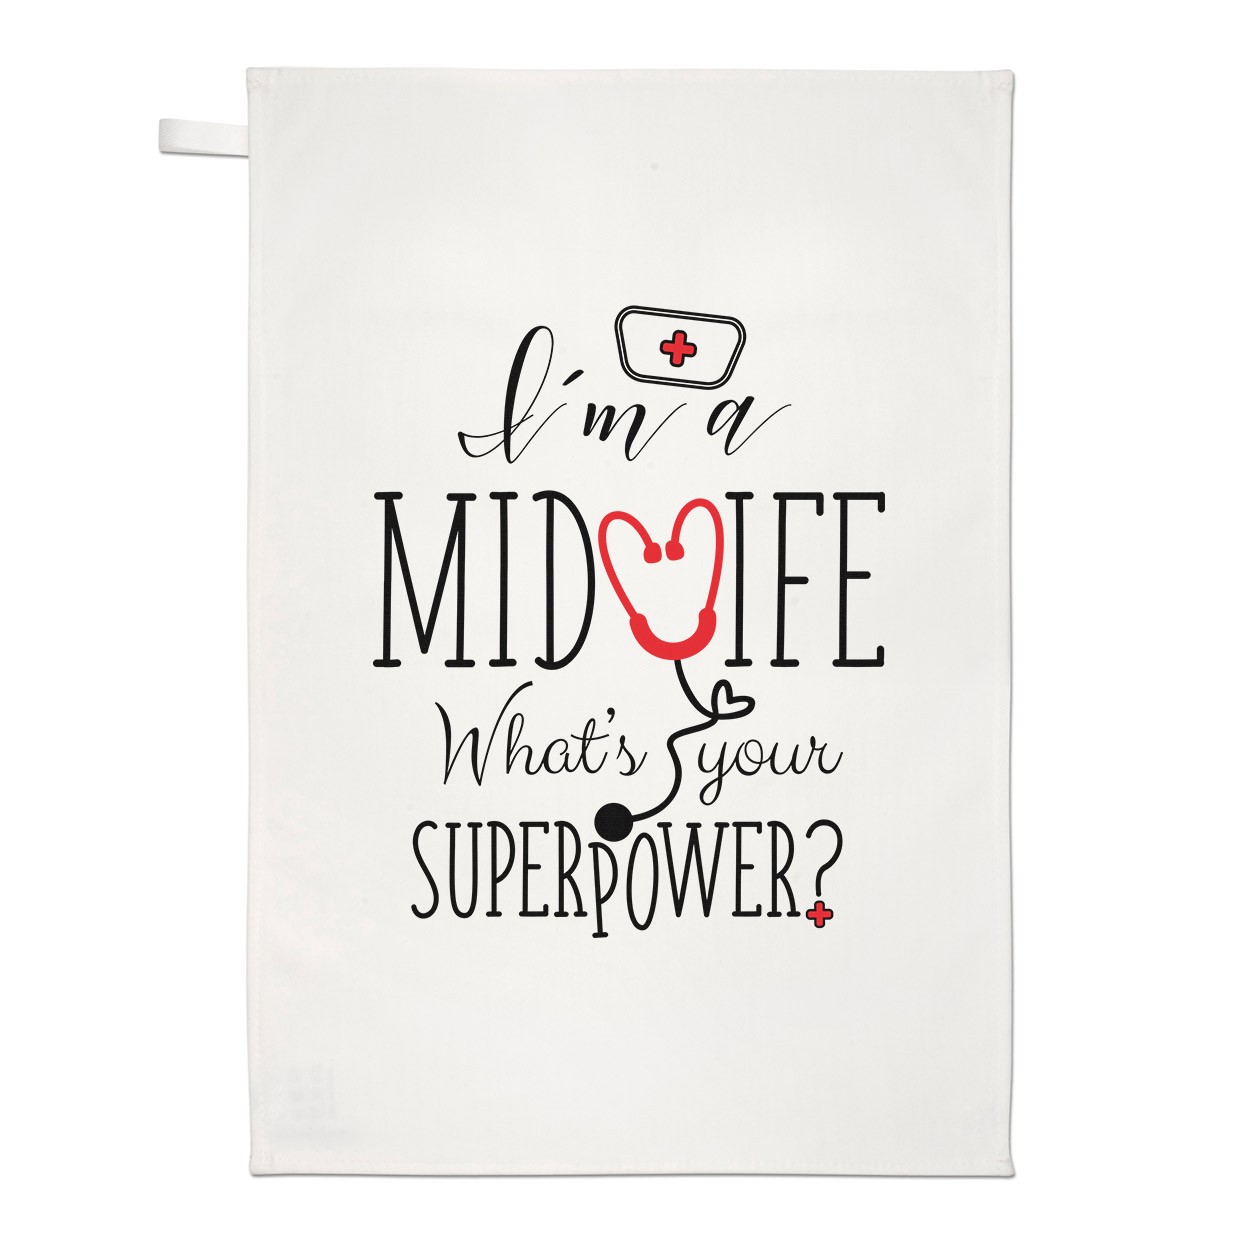 I'm A Midwife What's Your Superpower Tea Towel Dish Cloth